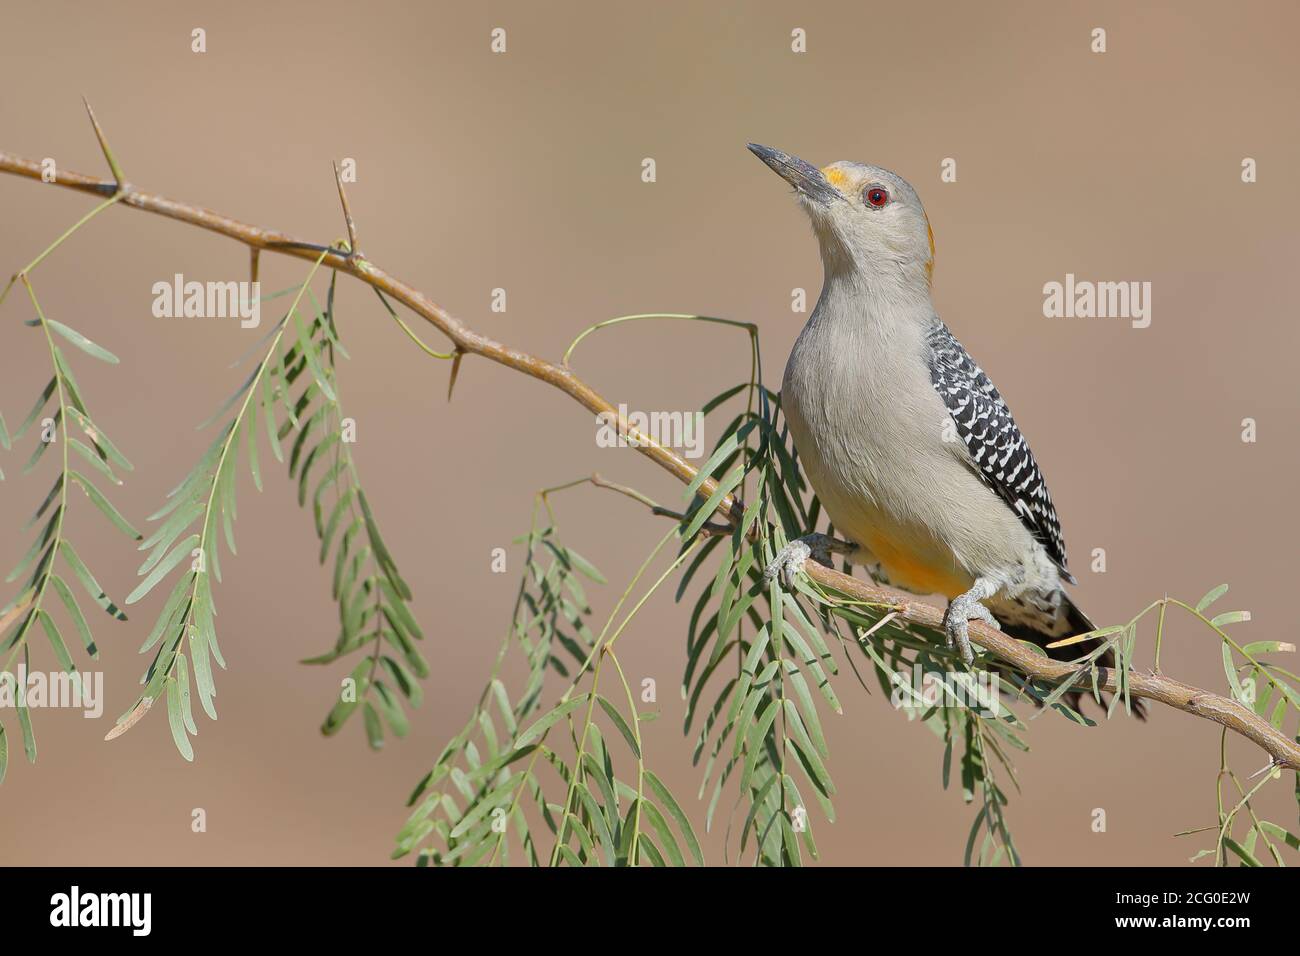 Golden-fronted Woodpecker (Melanerpes aurifrons) on branch in South Texas, USA Stock Photo